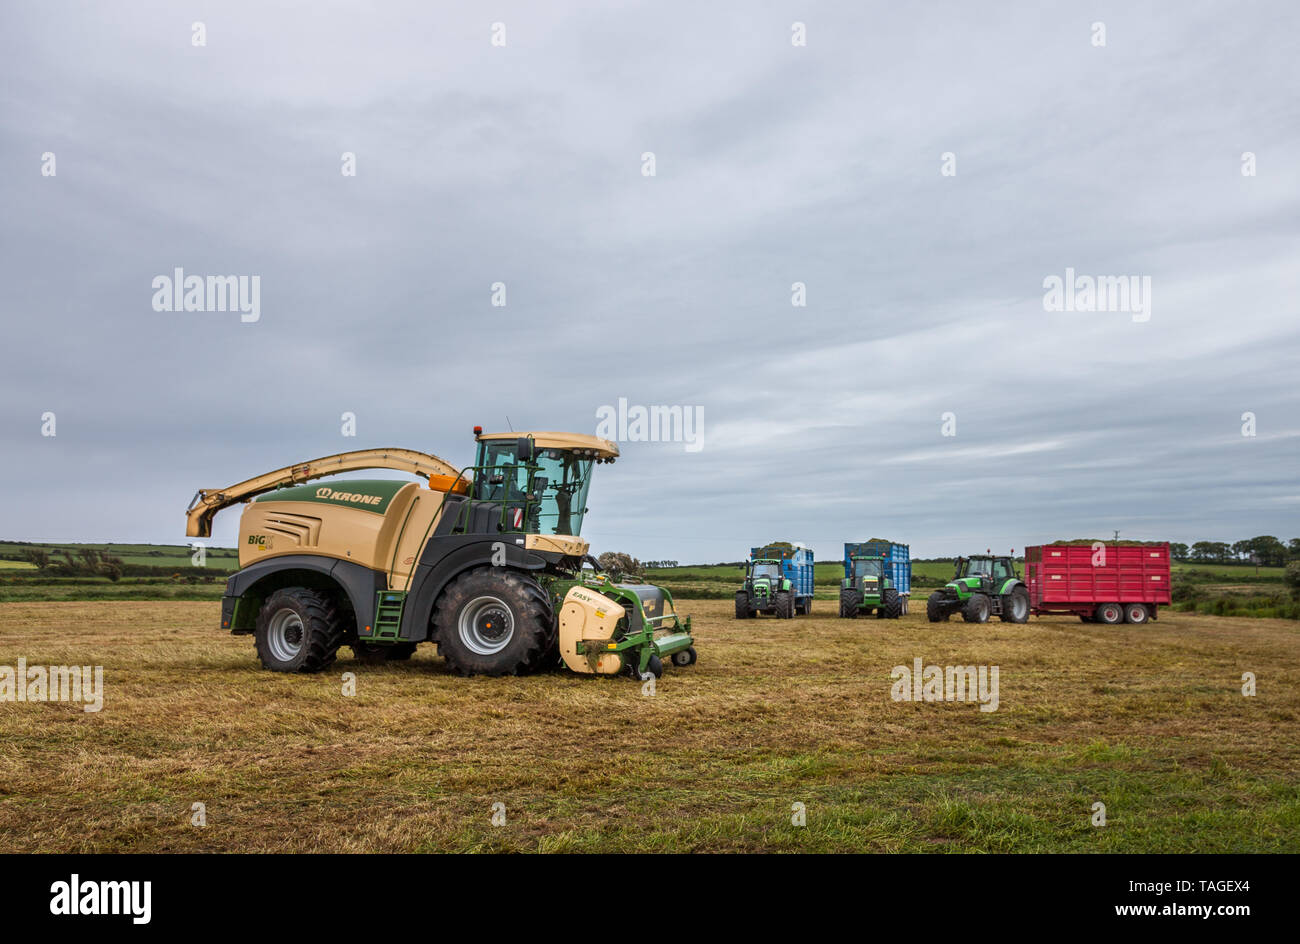 Garryvoe, Cork, Ireland. 25th May, 2019. On a grey overcast morning a combine harvester with tractors and trailers are parked overnight in a field, af Stock Photo